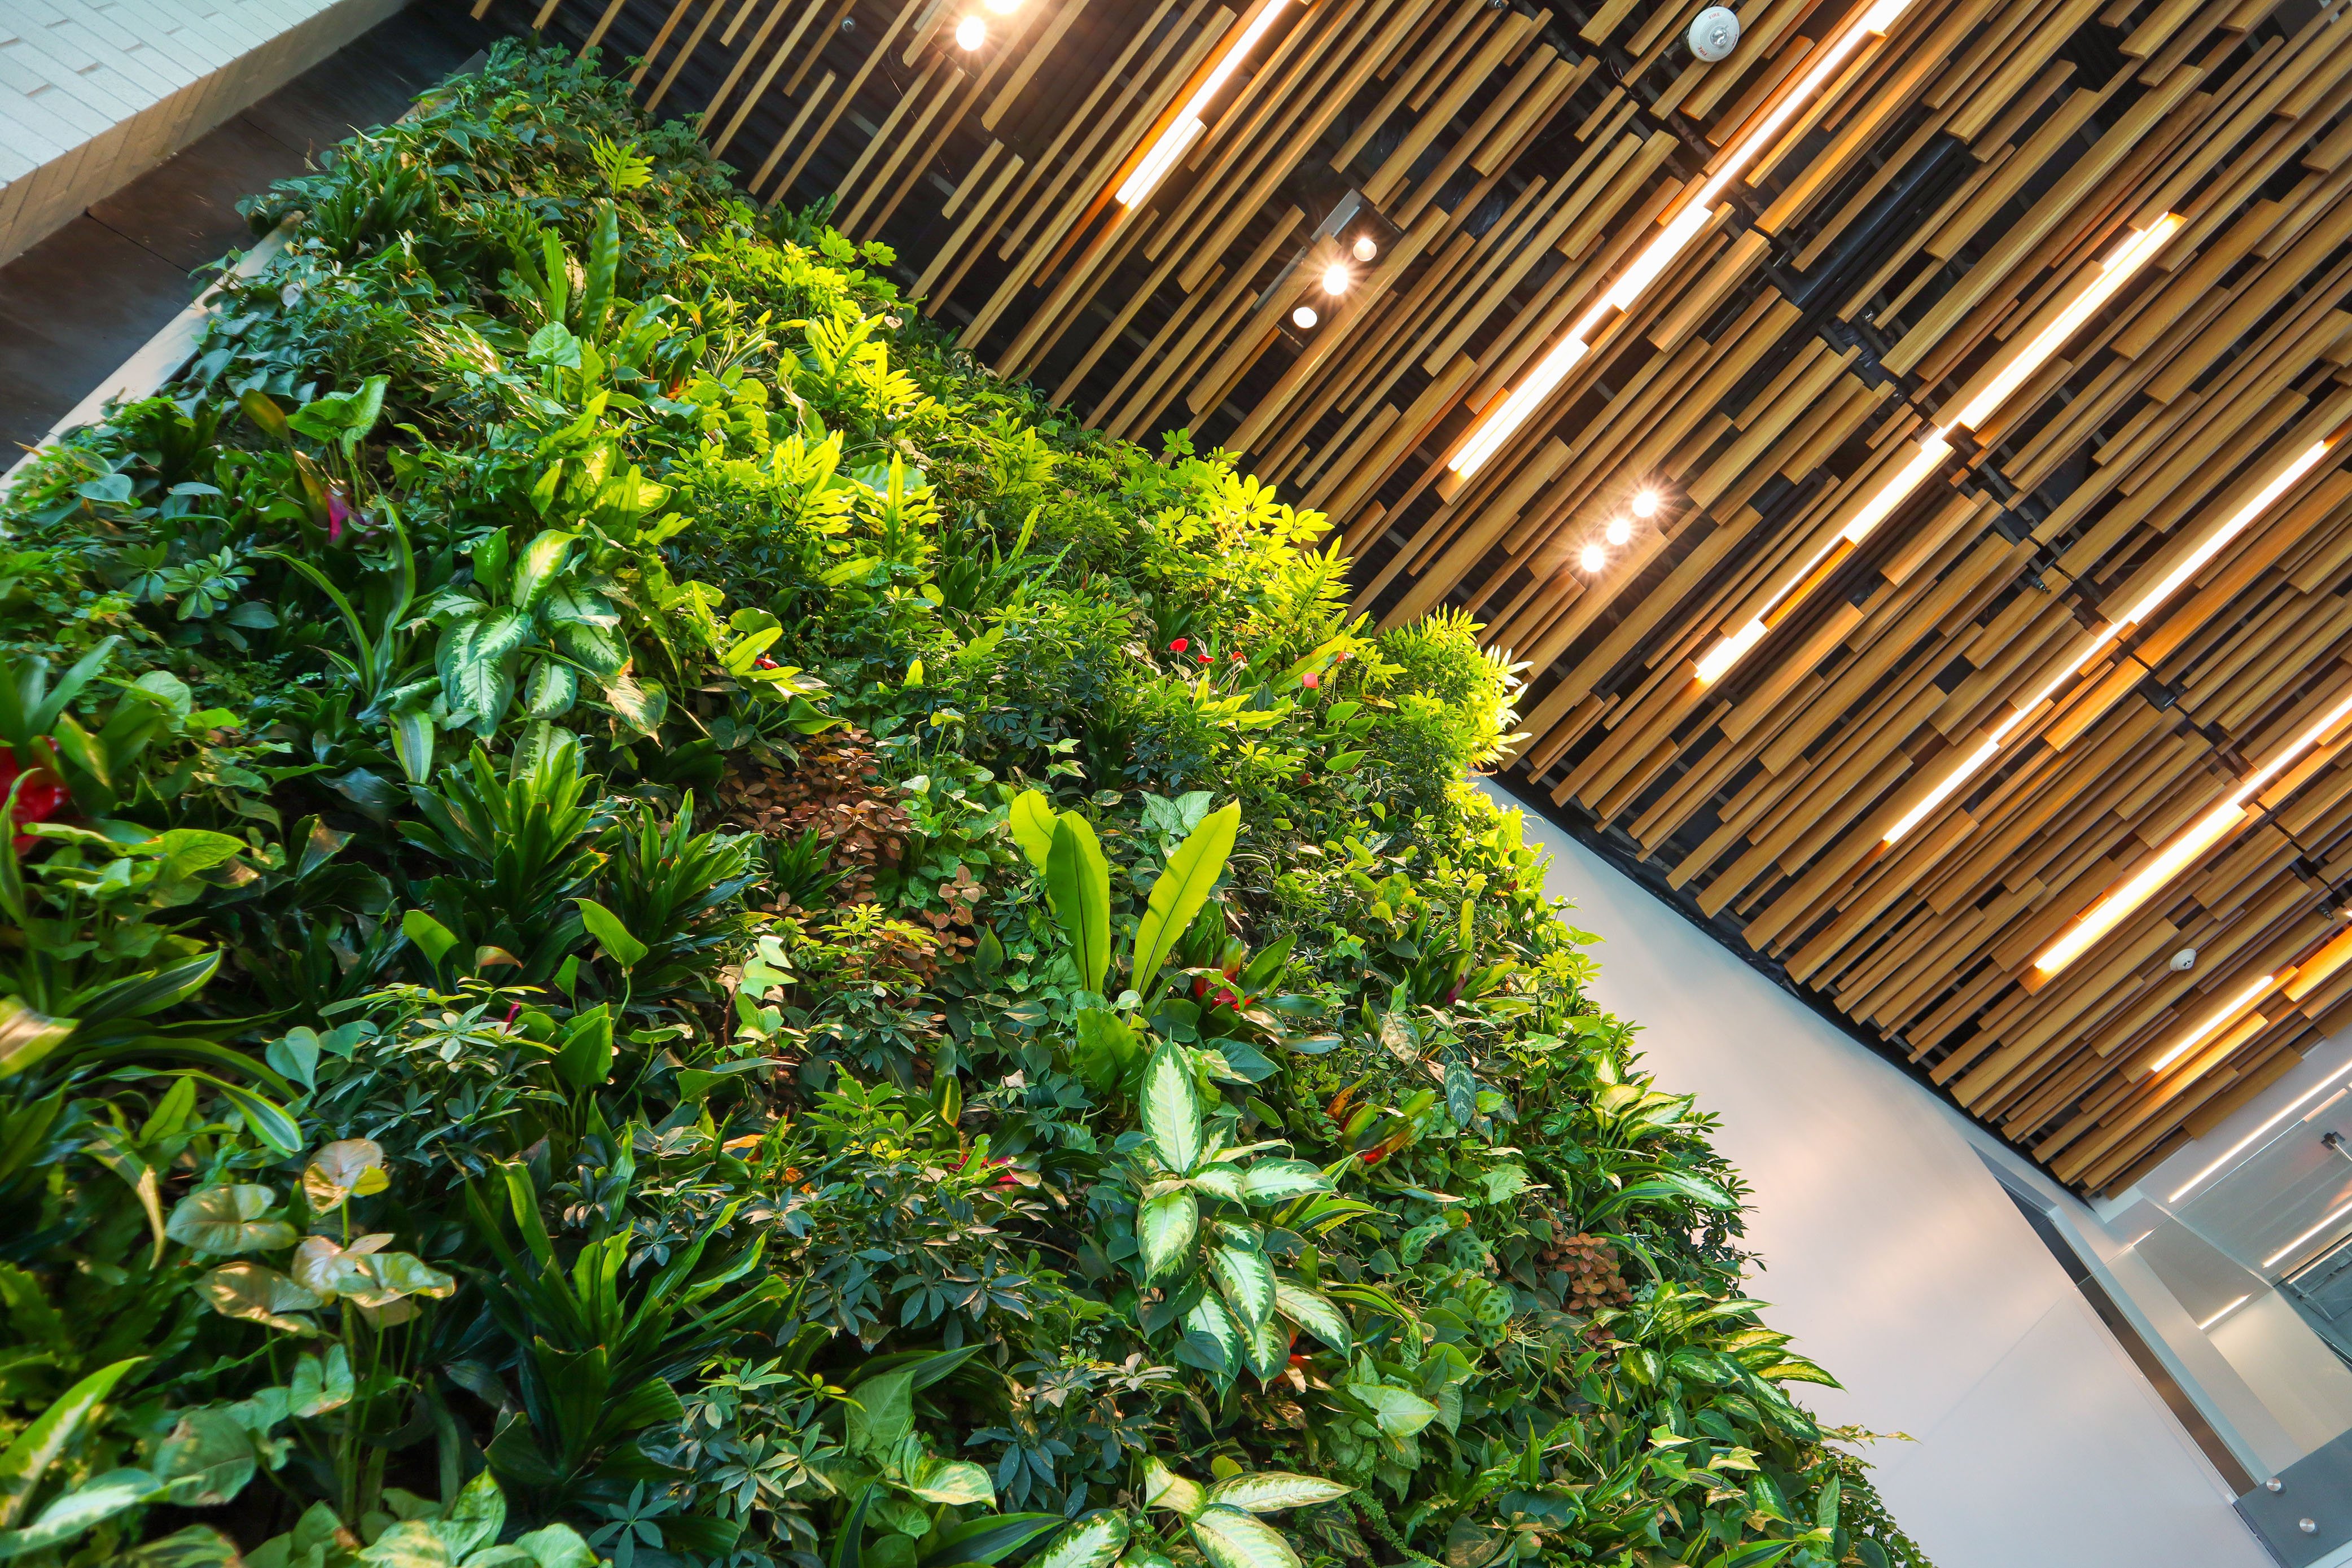 Green wall indoor - Miami Stainless